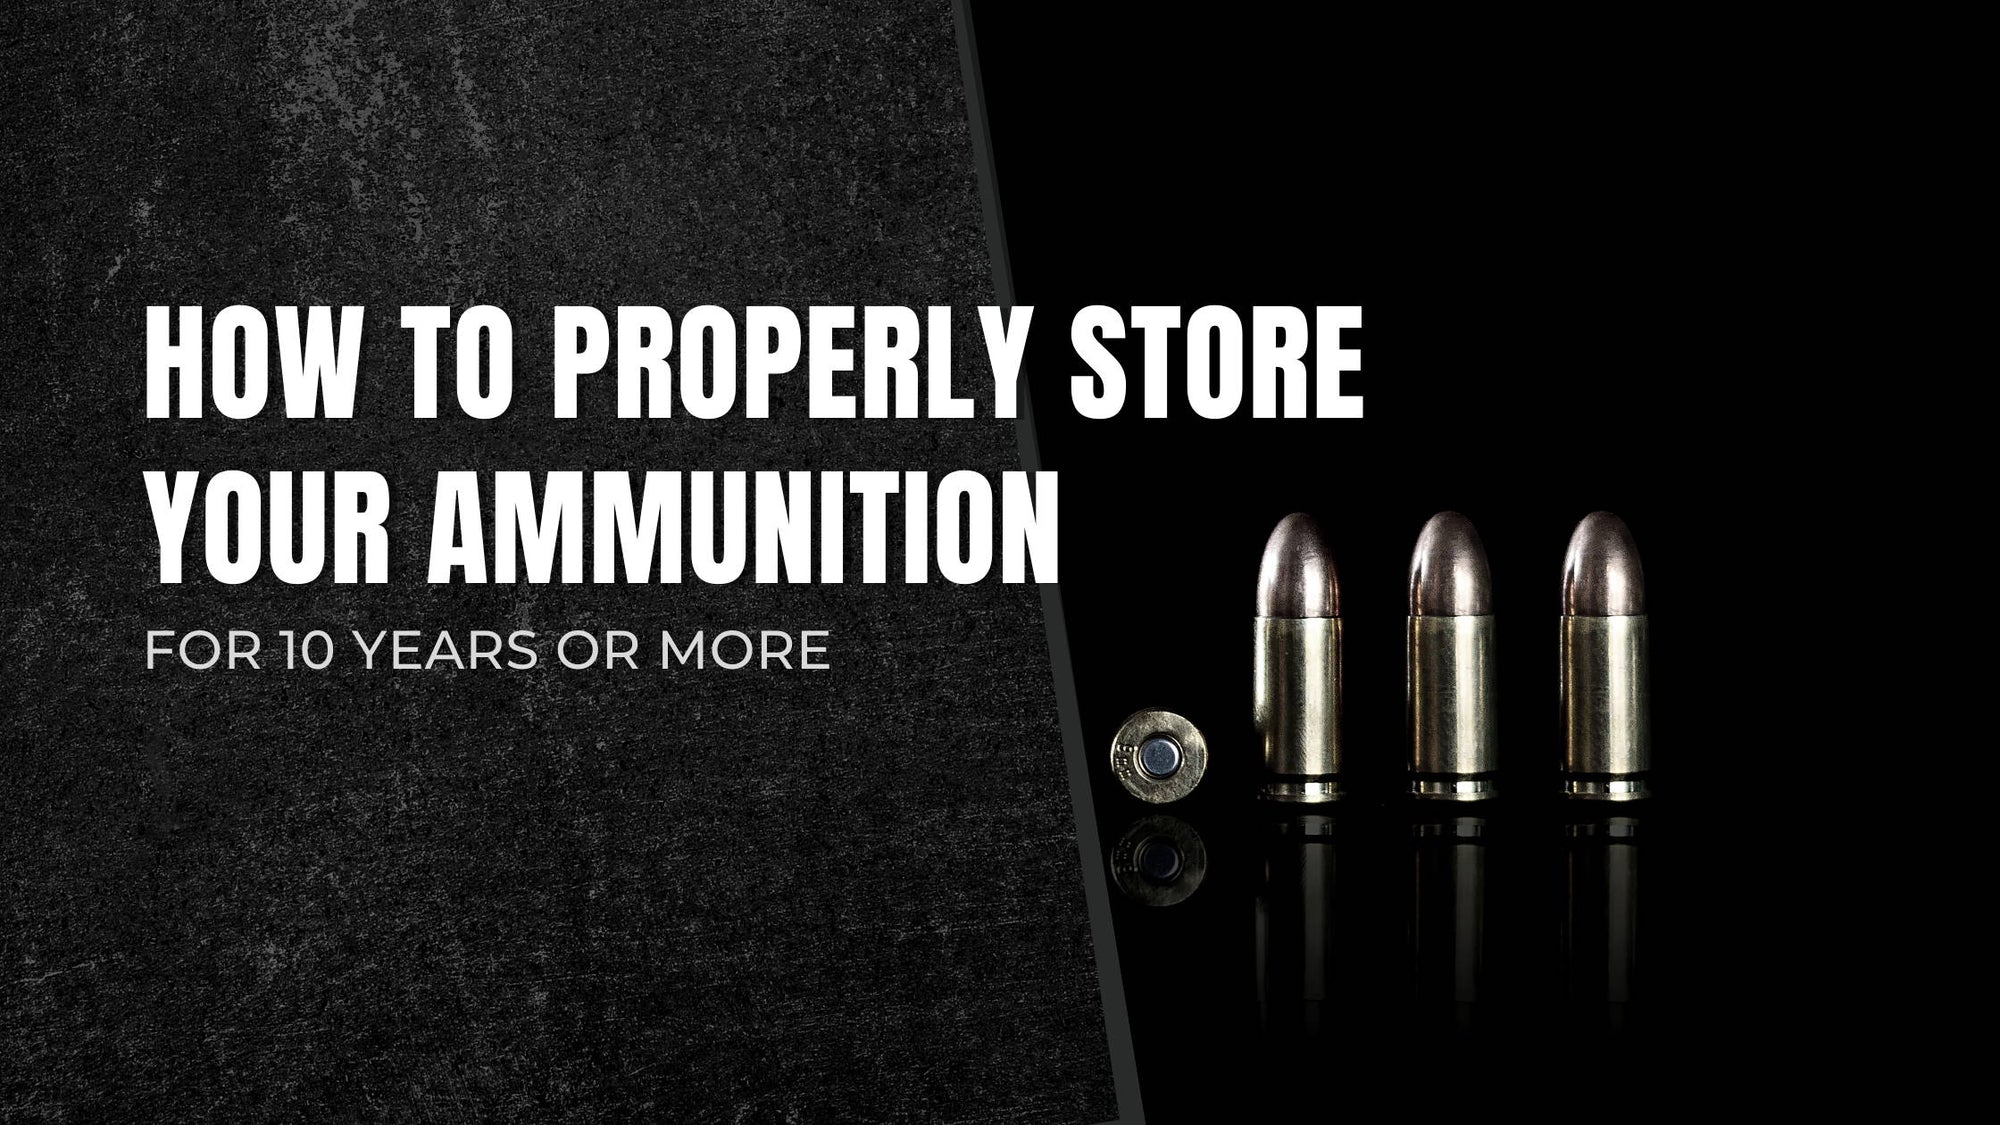 How To Properly Store Your Ammunition for 10 Years or More